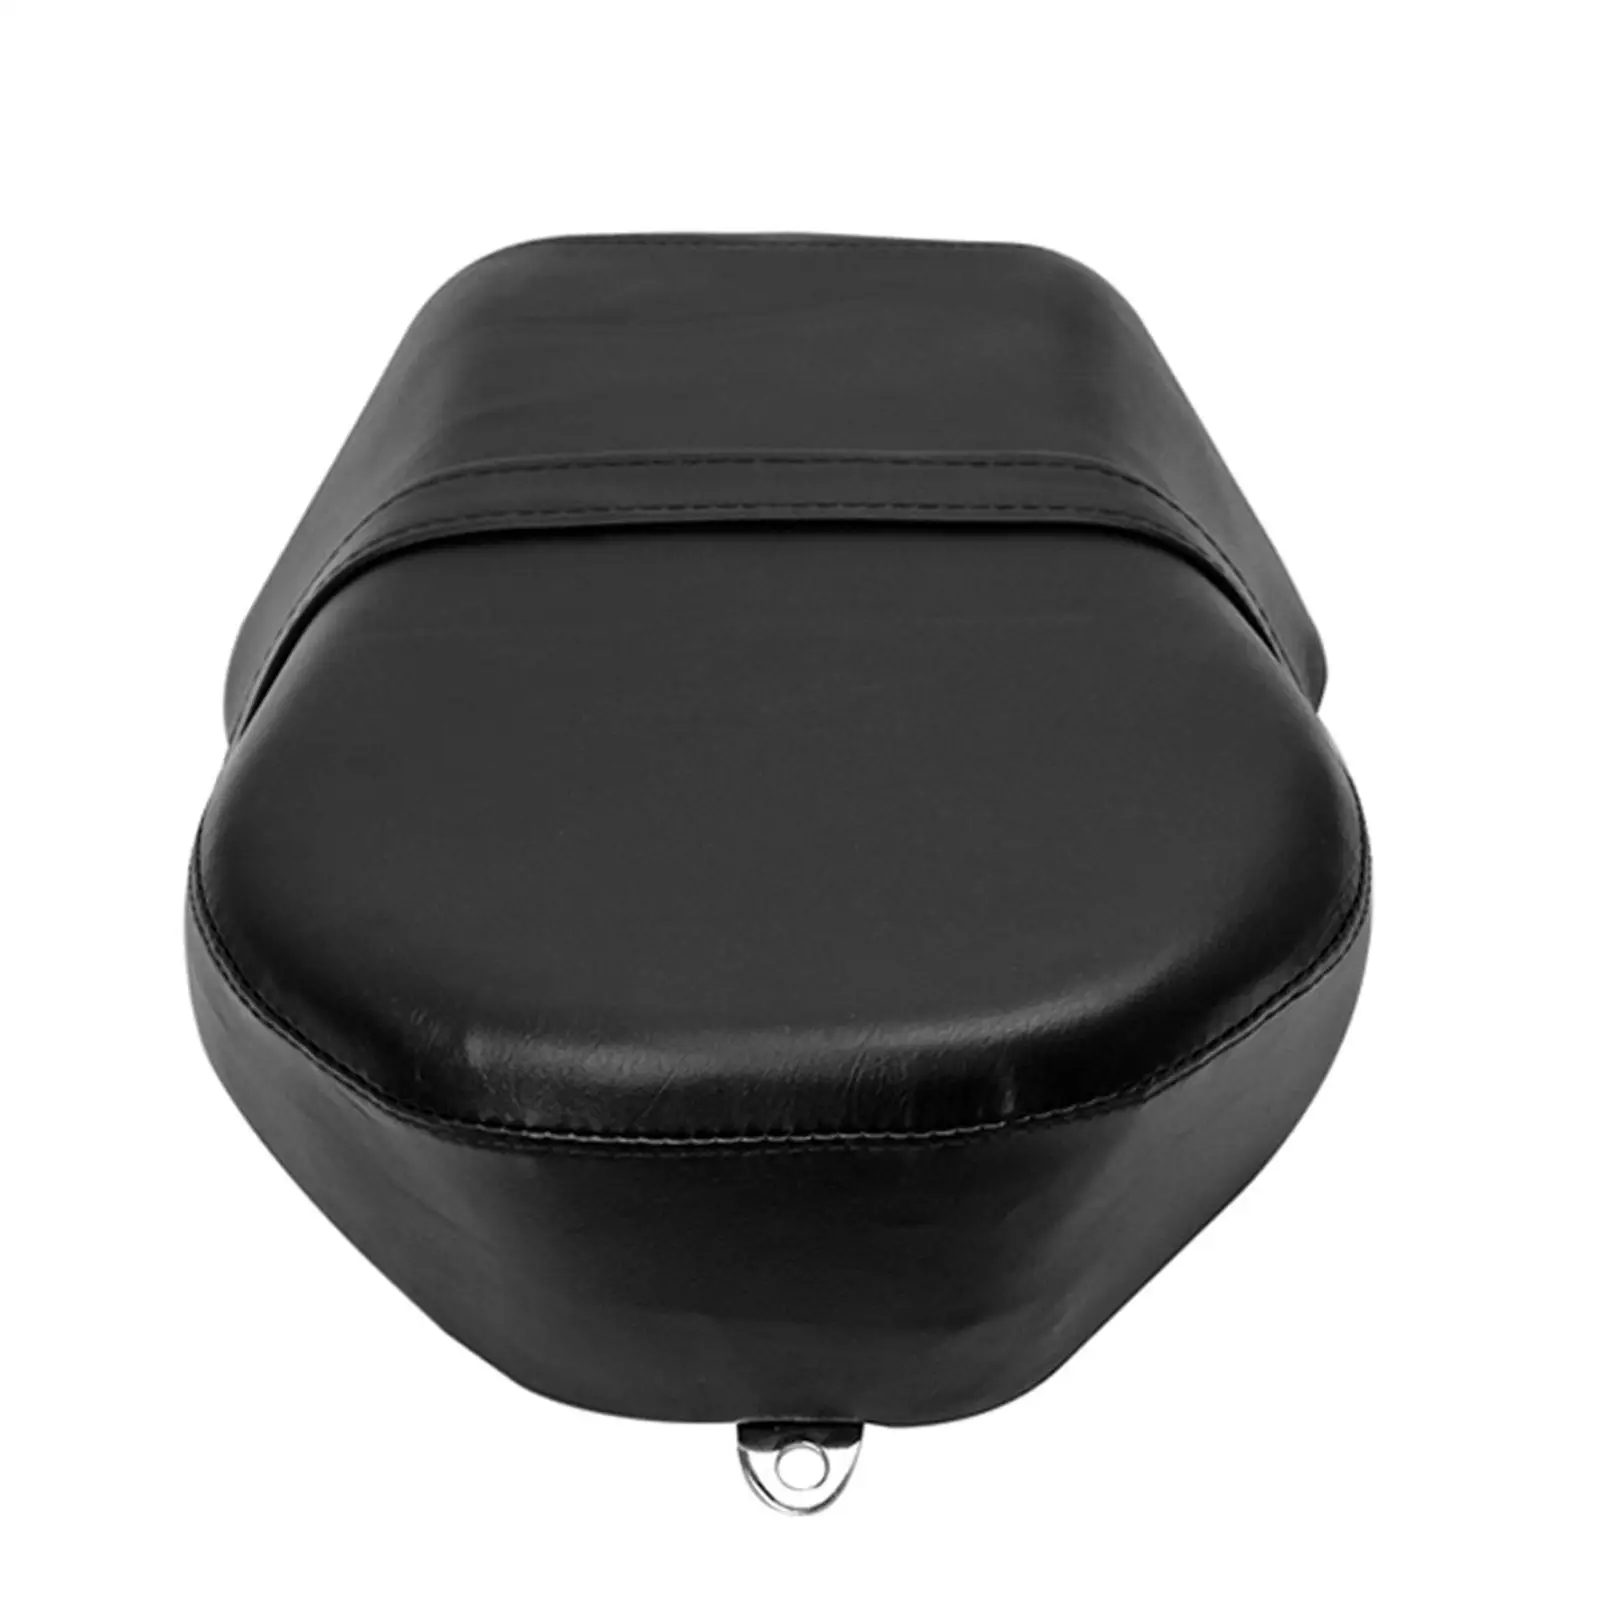 Motorcycle Passenger Seat Cushion for Harley Sportster Easy to Install